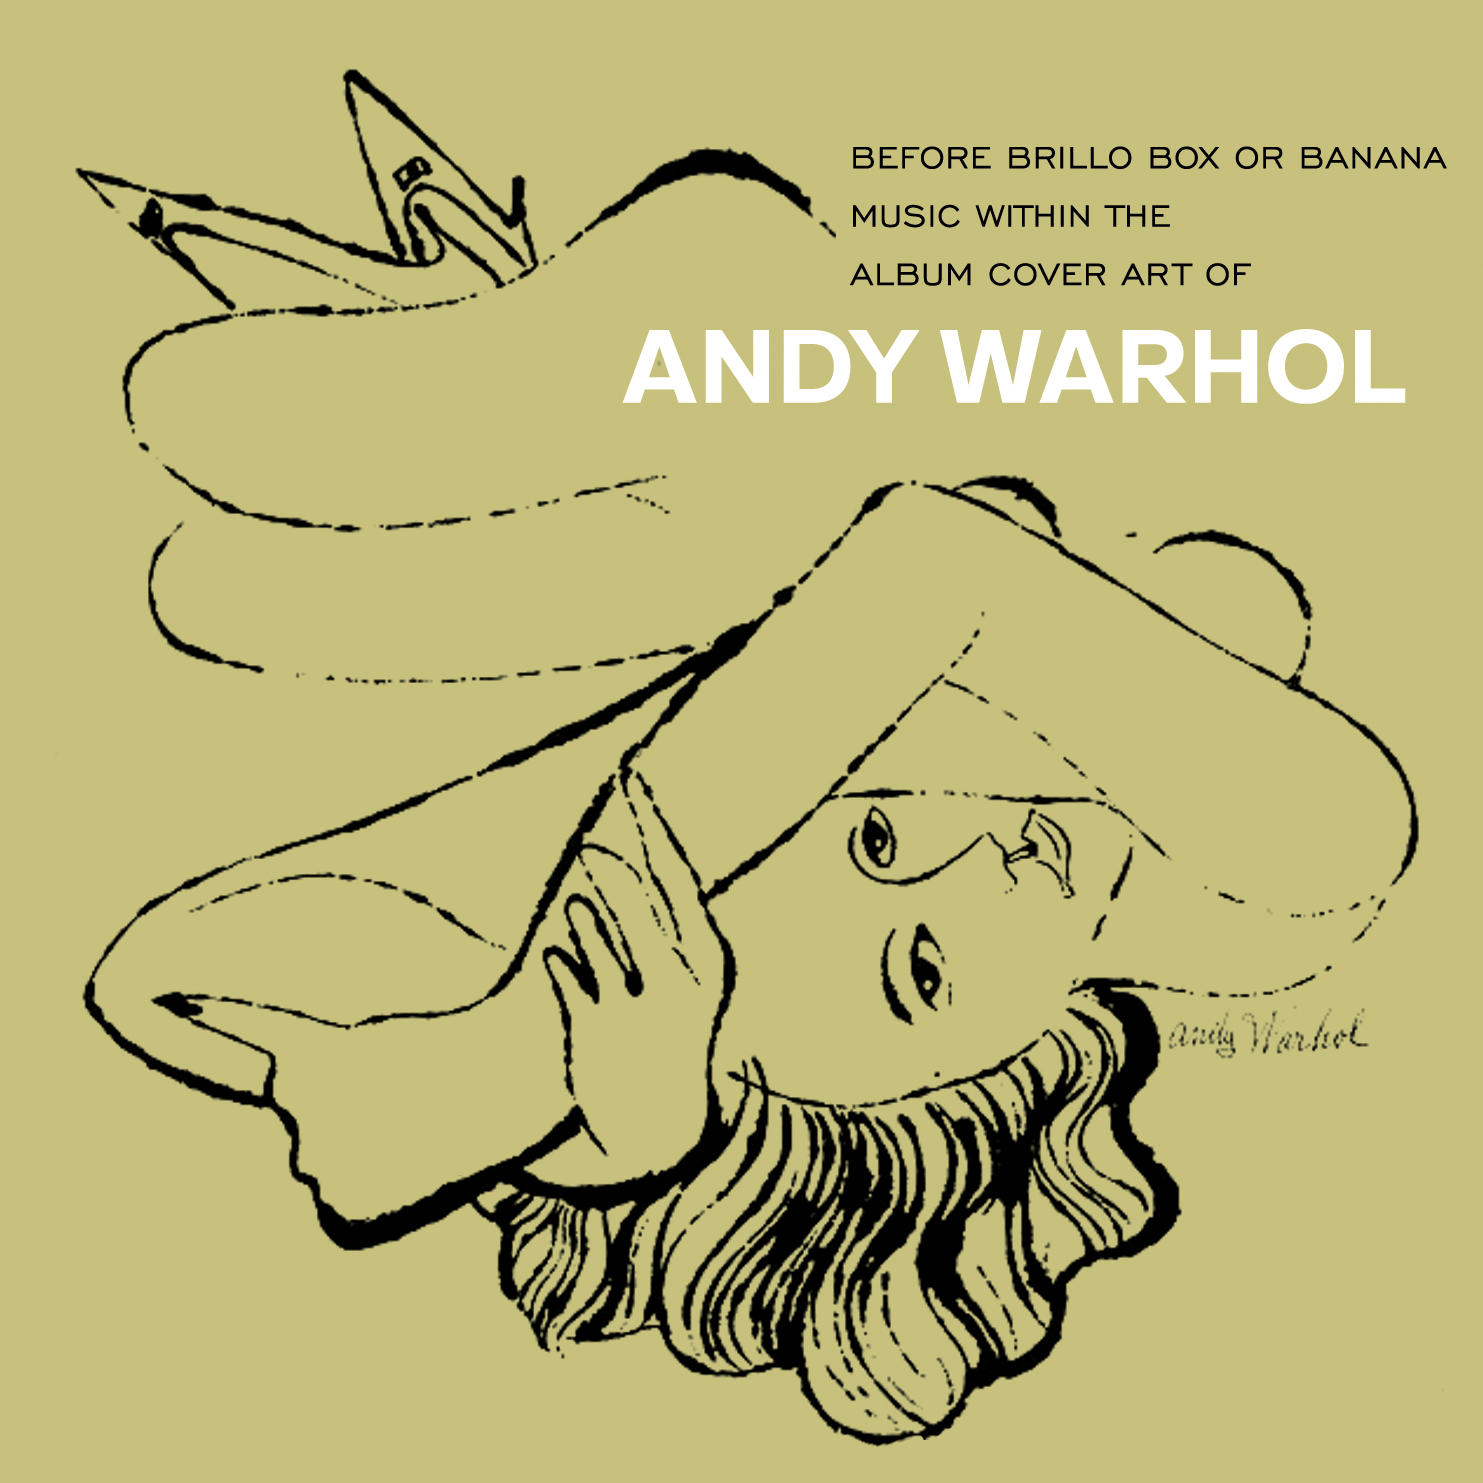 Before Brillo Box or Banana: Music With The Album Cover Art of Andy Warhol -El records